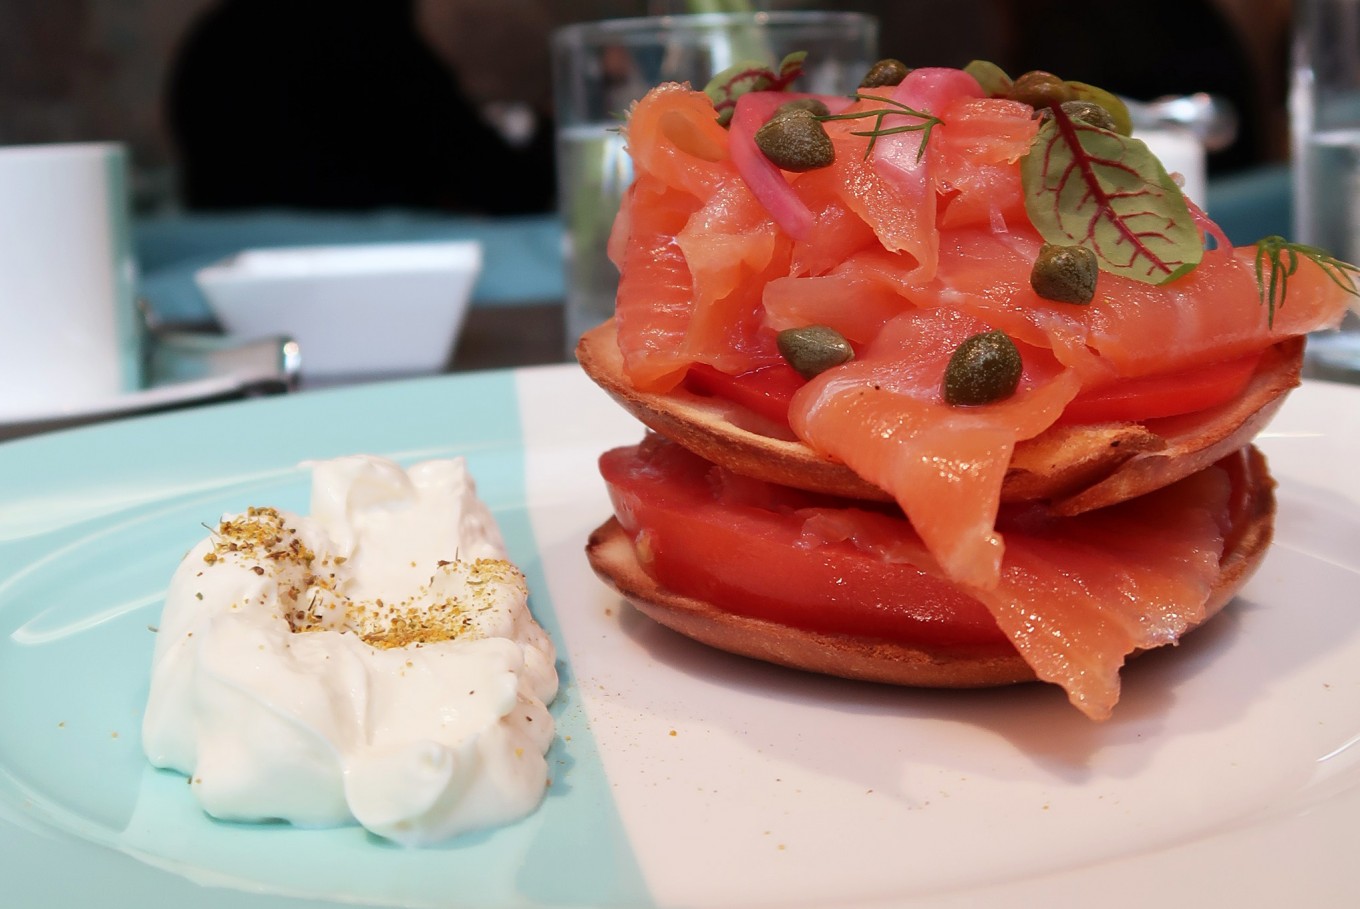 Breakfast at Tiffany's - Blue Box Cafe NYC Vlog and Review 